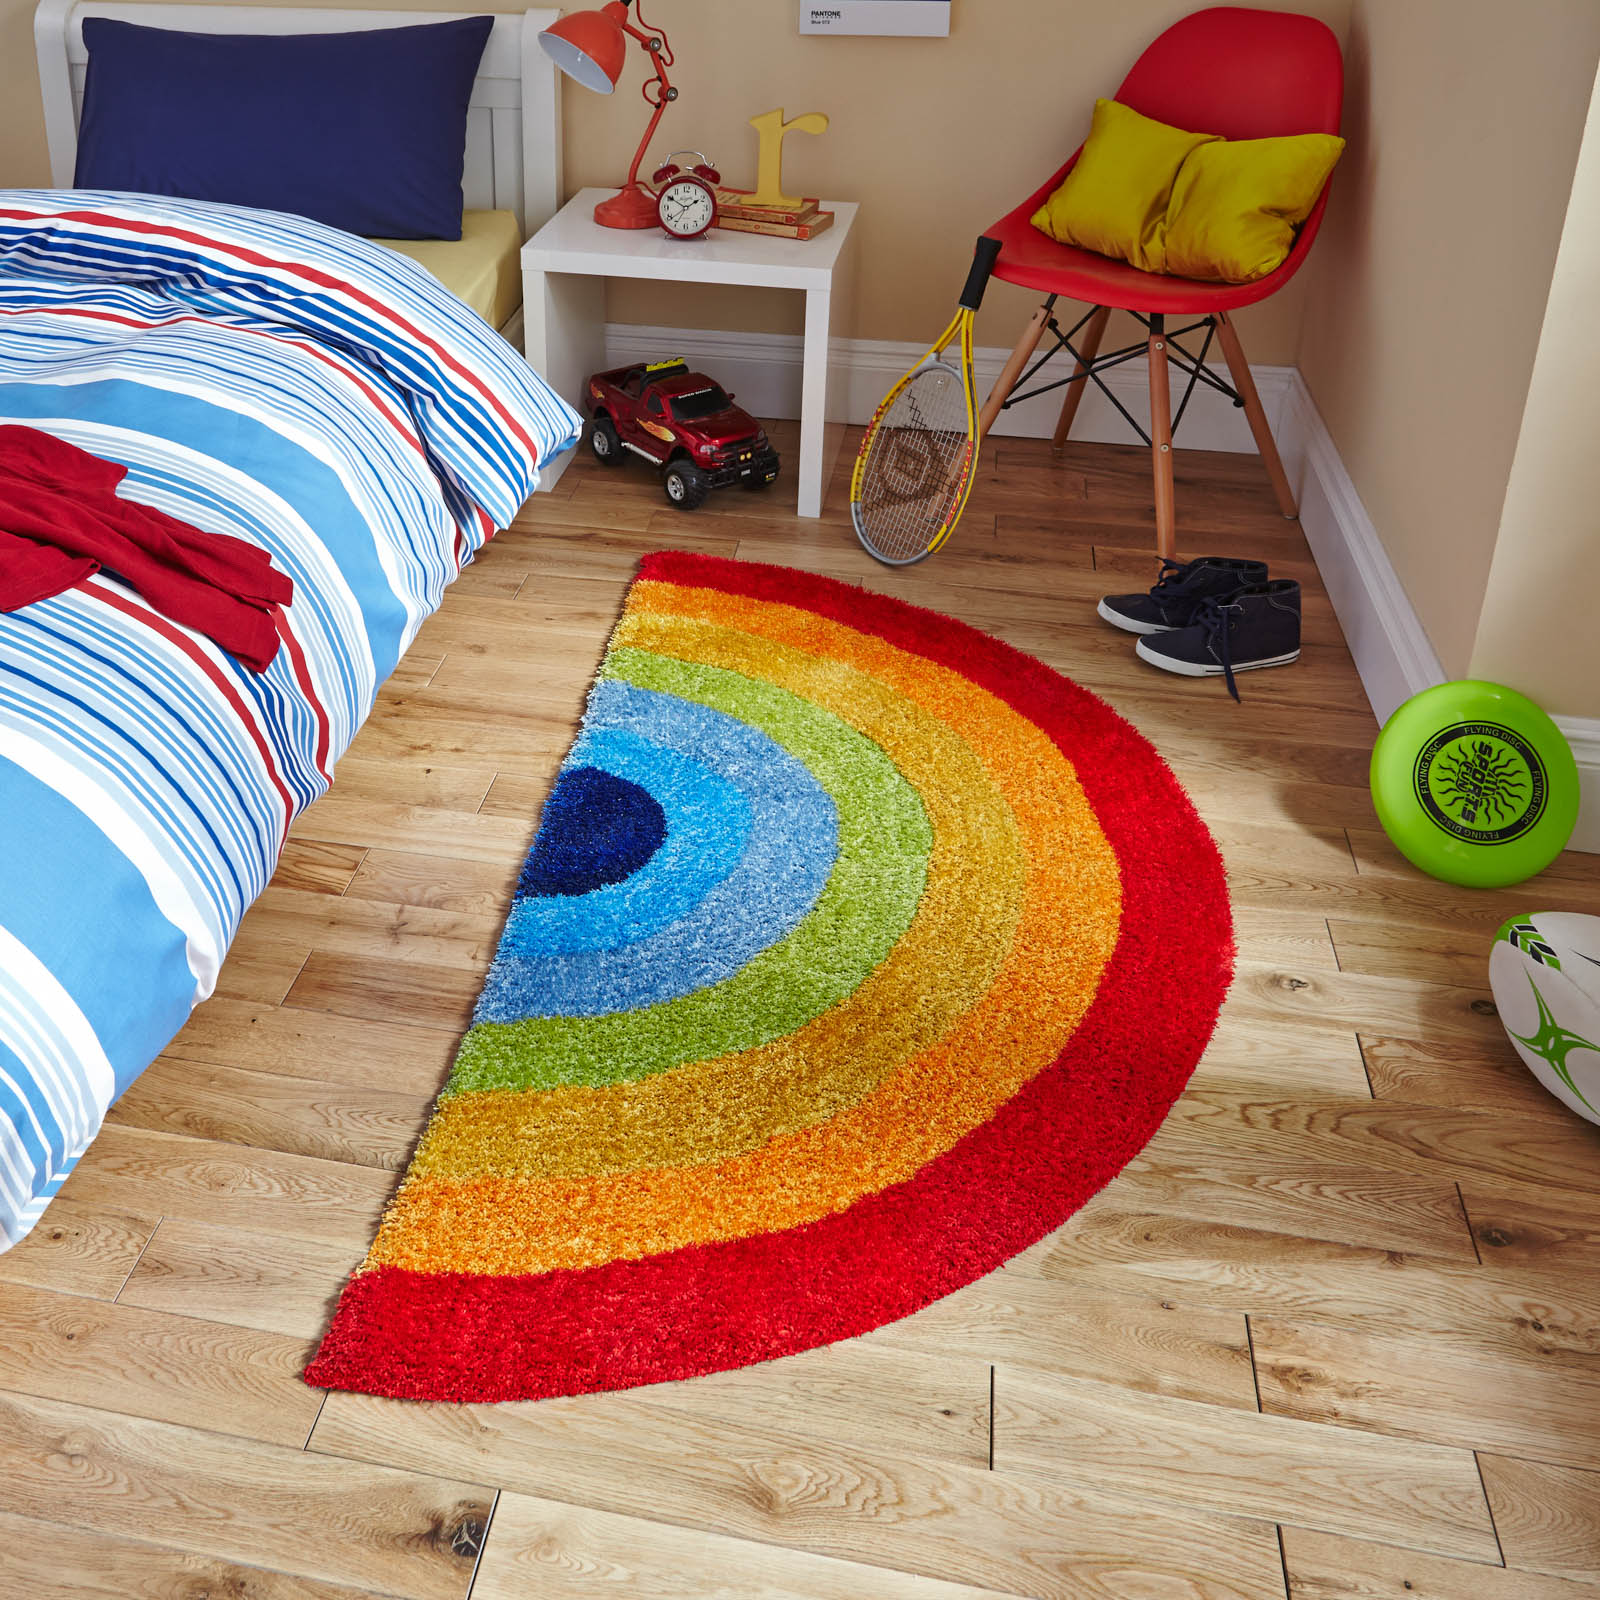 Tips for buying children rugs: